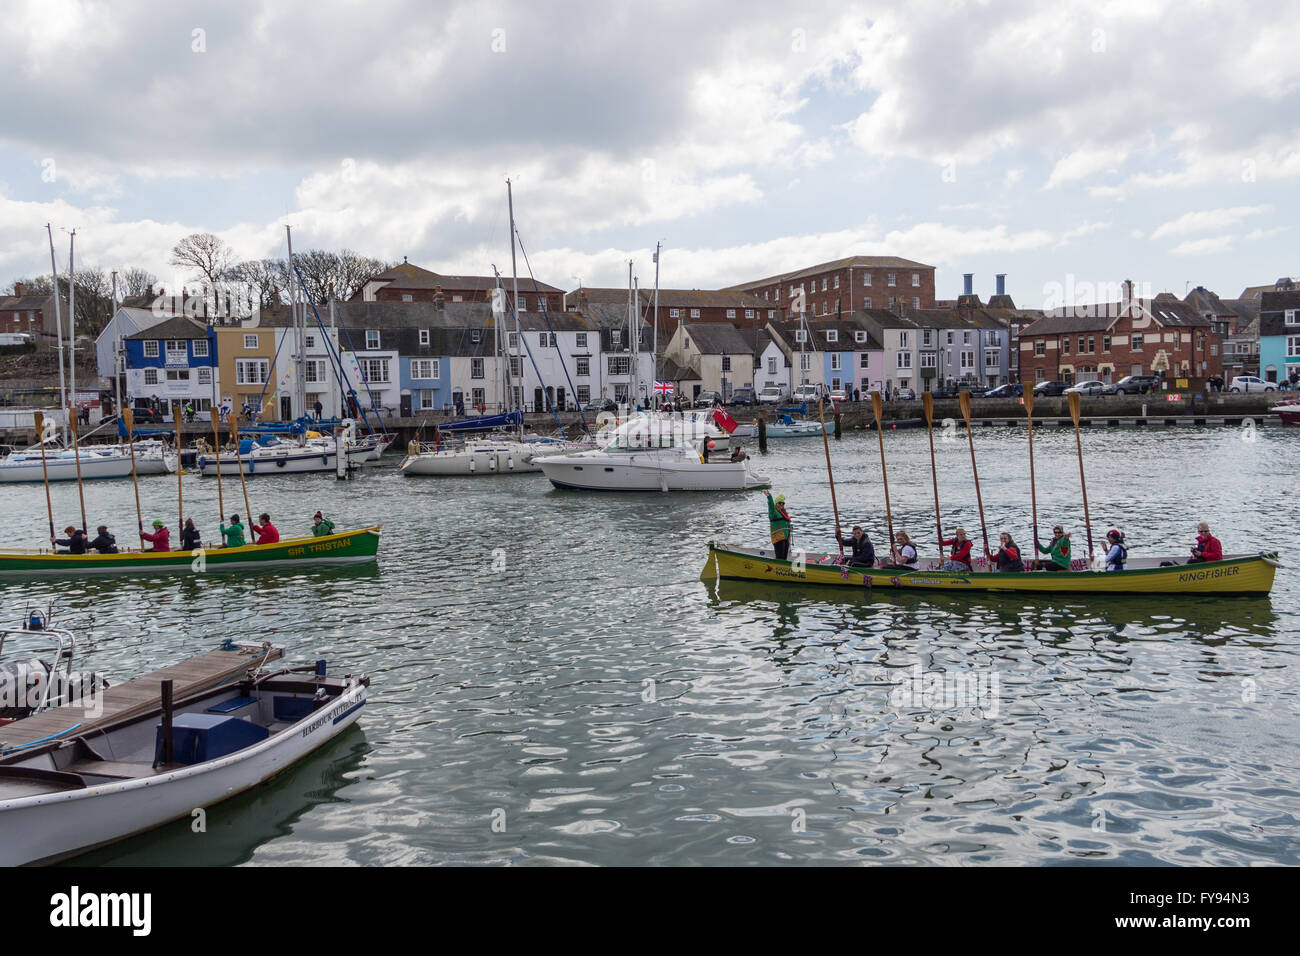 Weymouth, England. 23 April 2016. Queen's 90th Birthday Floating Tribute. Two rowing boats, rowers saluting. Credit:  Frances Underwood/Alamy Live News Stock Photo